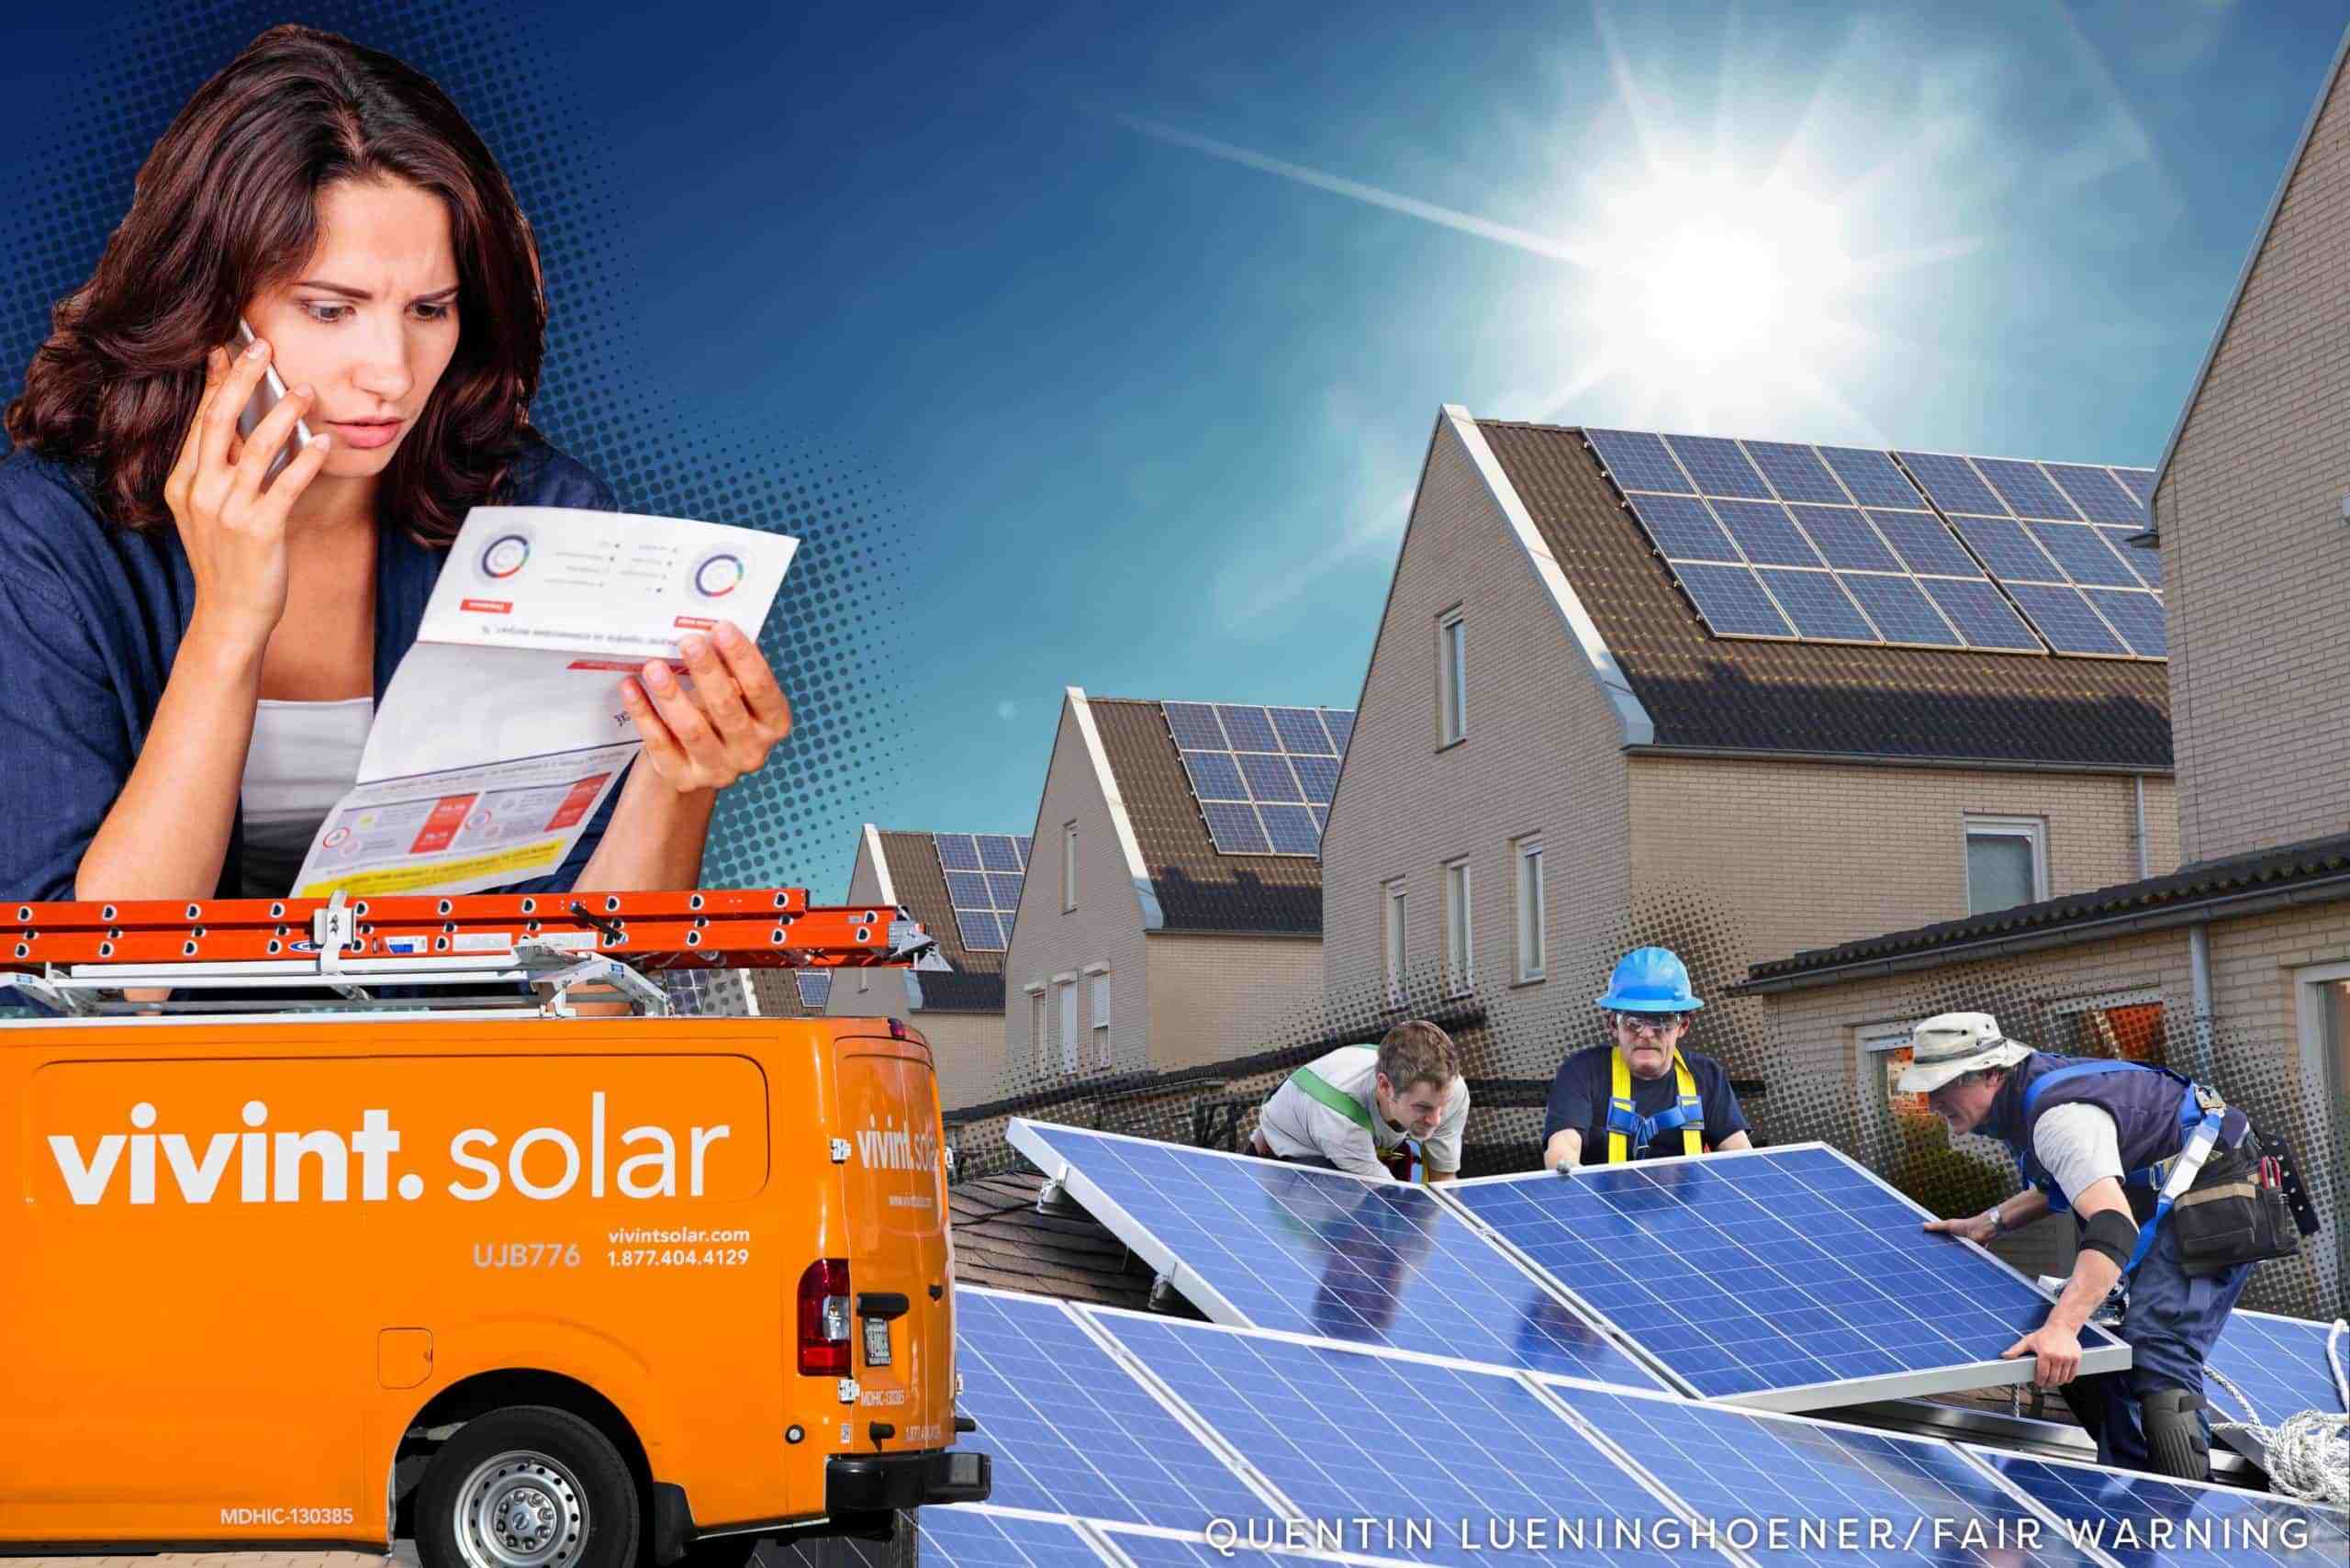 Can I buy solar panels outright?